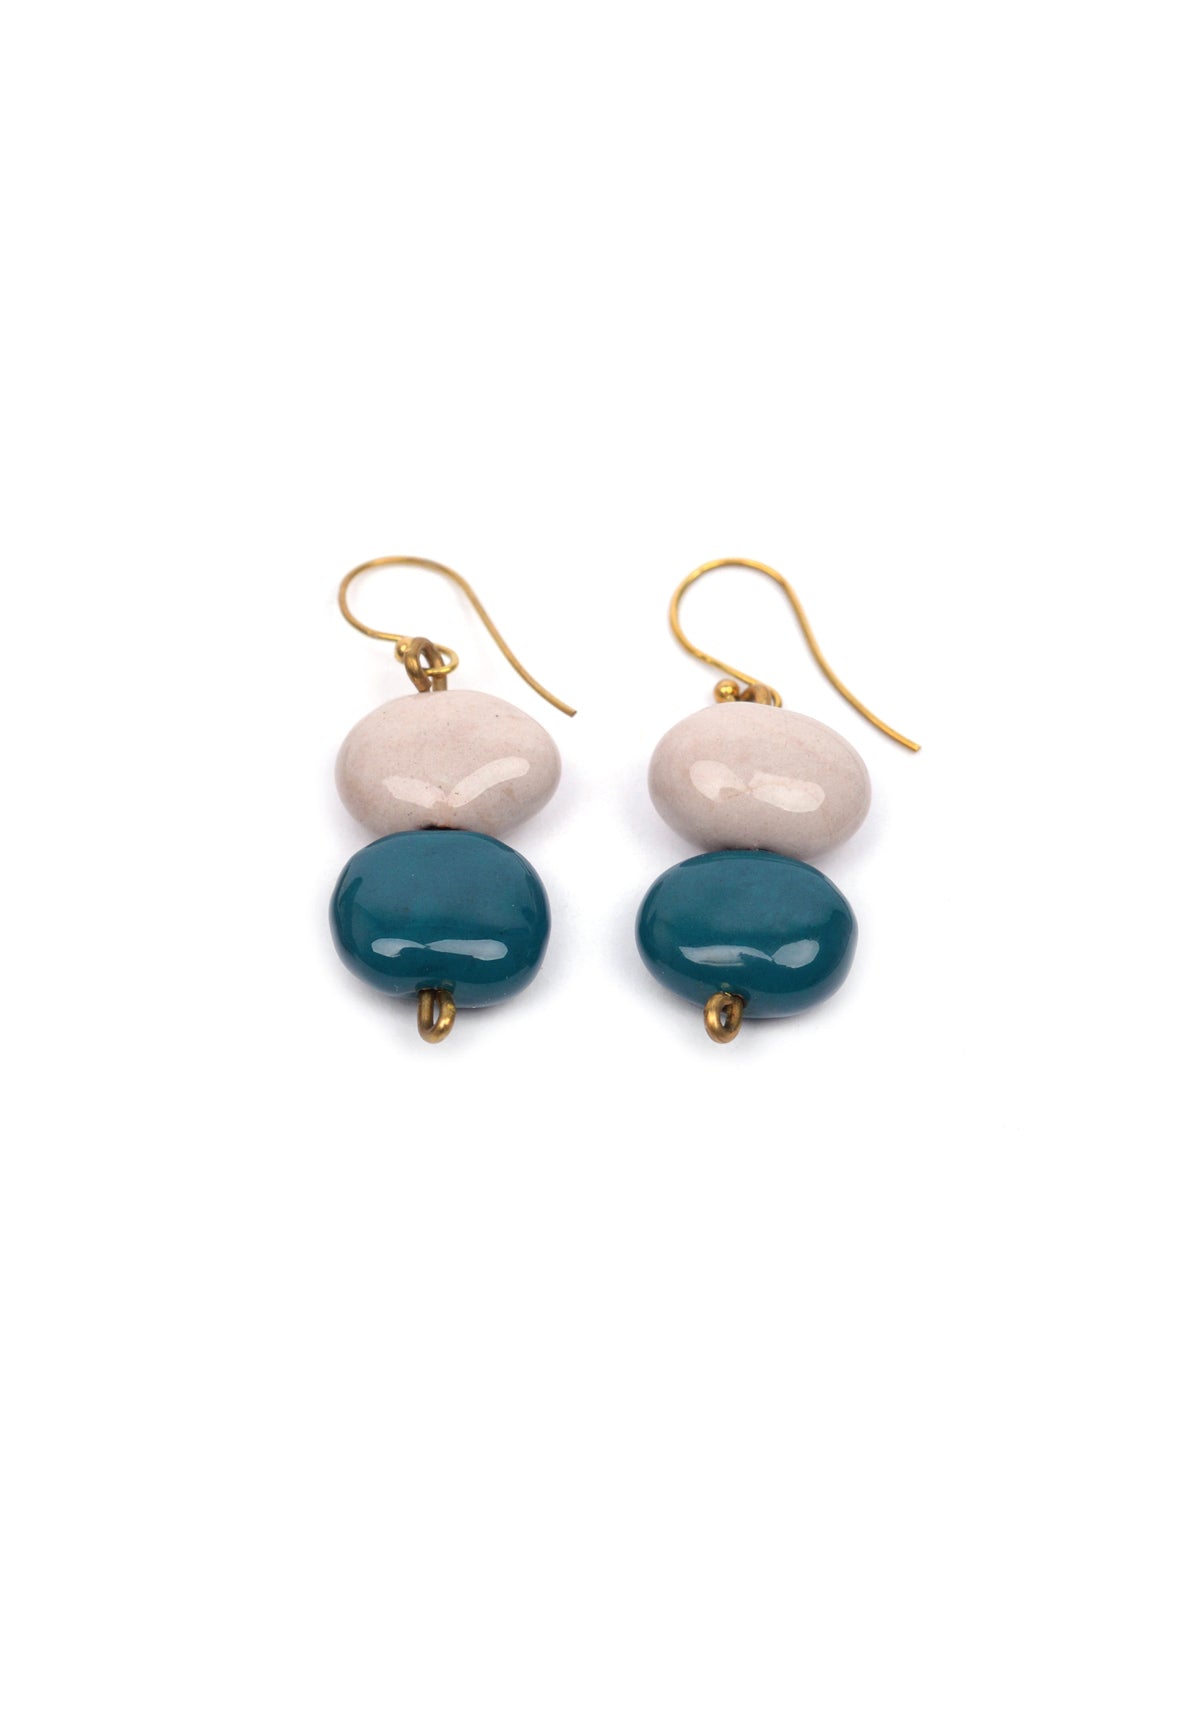 EARRINGS WITH CERAMIC BEADS